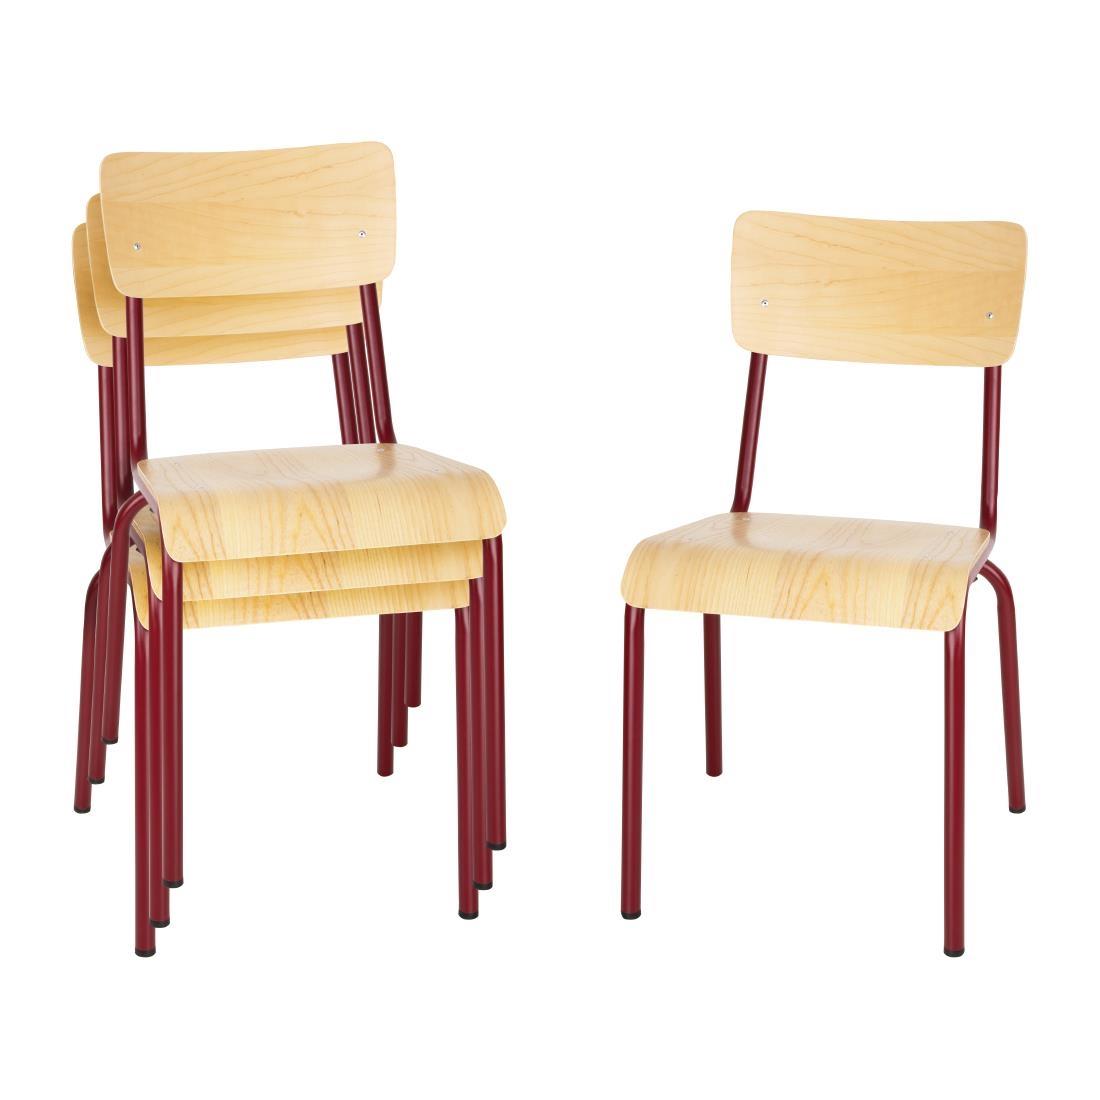 Bolero Cantina Side Chairs with Wooden Seat Pad and Backrest Wine Red (Pack of 4) - FB943  - 6